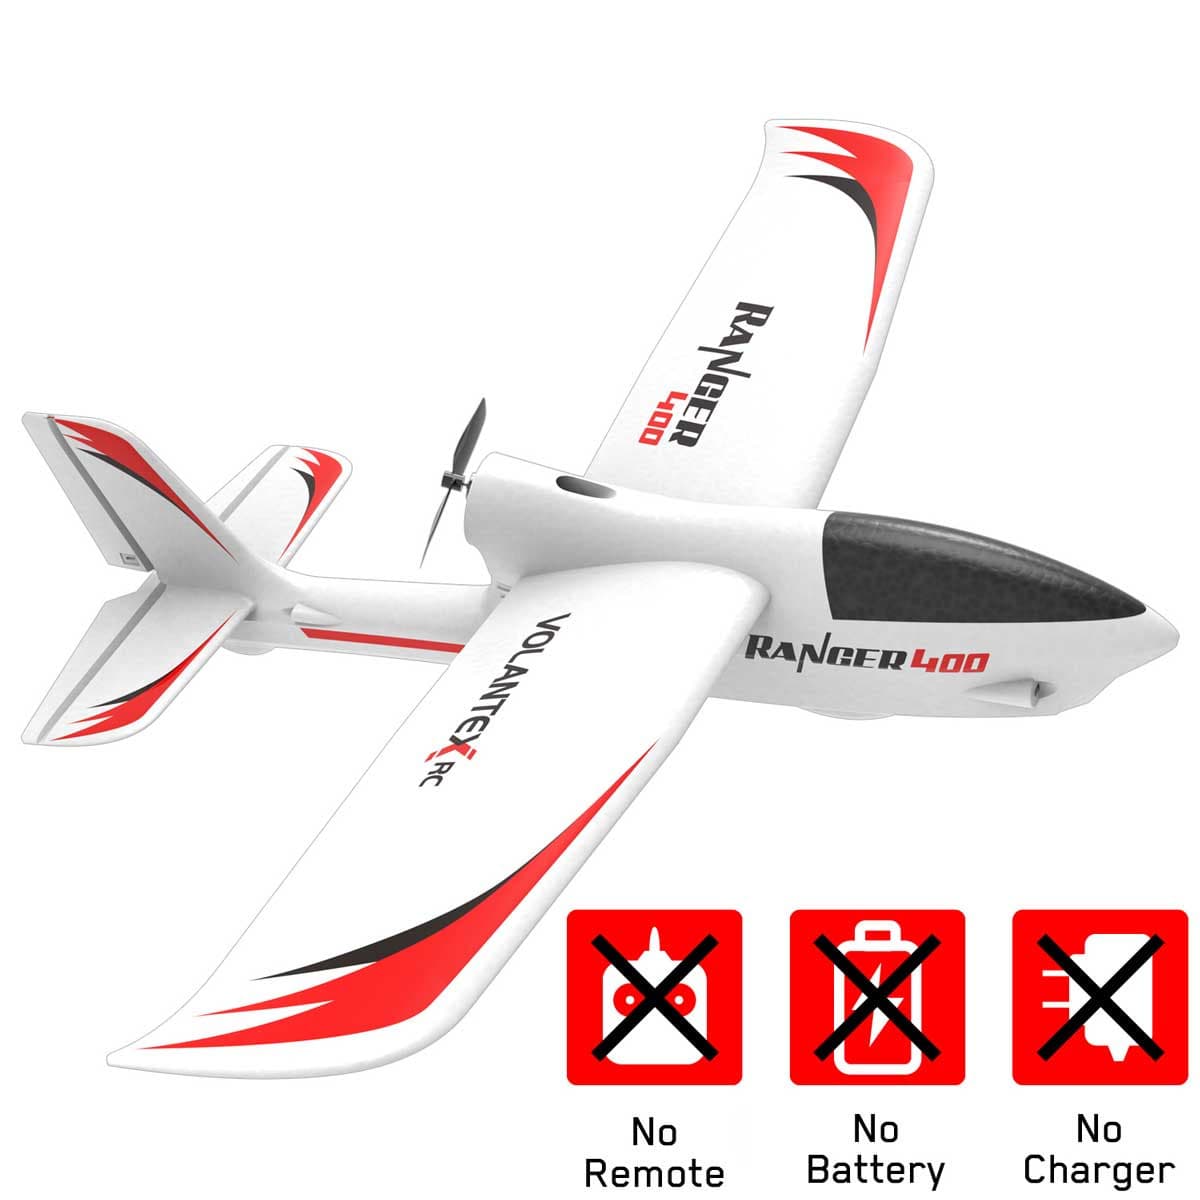 VOLANTEXRC Ranger 400 RC Trainer Airplane with Xpilot 6-AXIS Gyro System easy to fly for beginners park flyer rc glider (761-6) PNP.